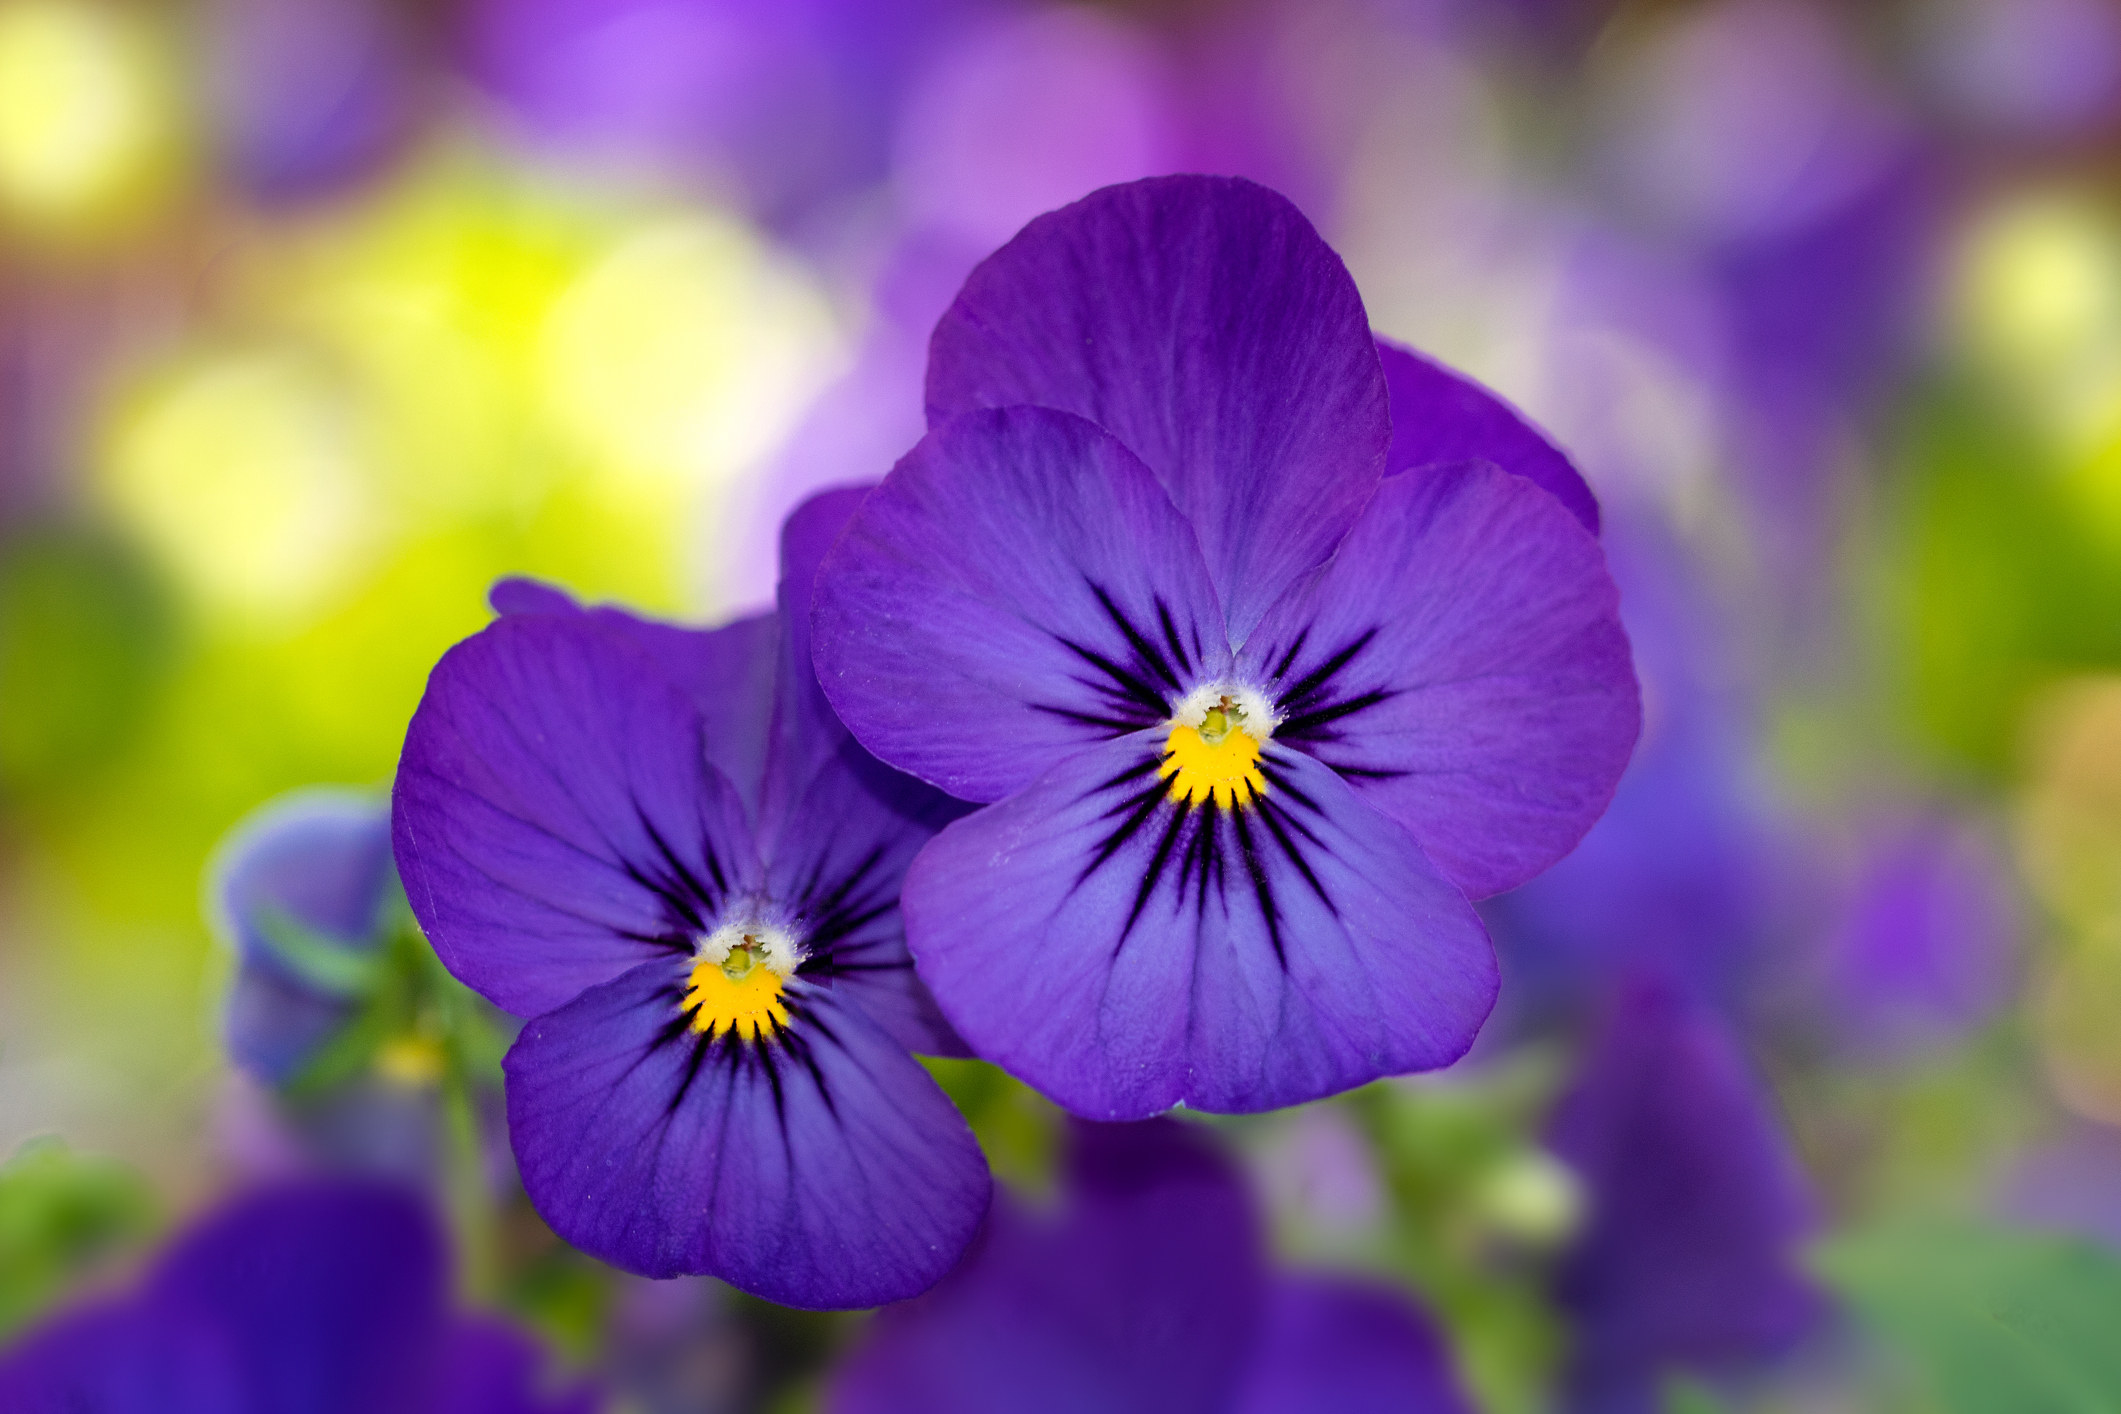 Two violet flowers sit in a field